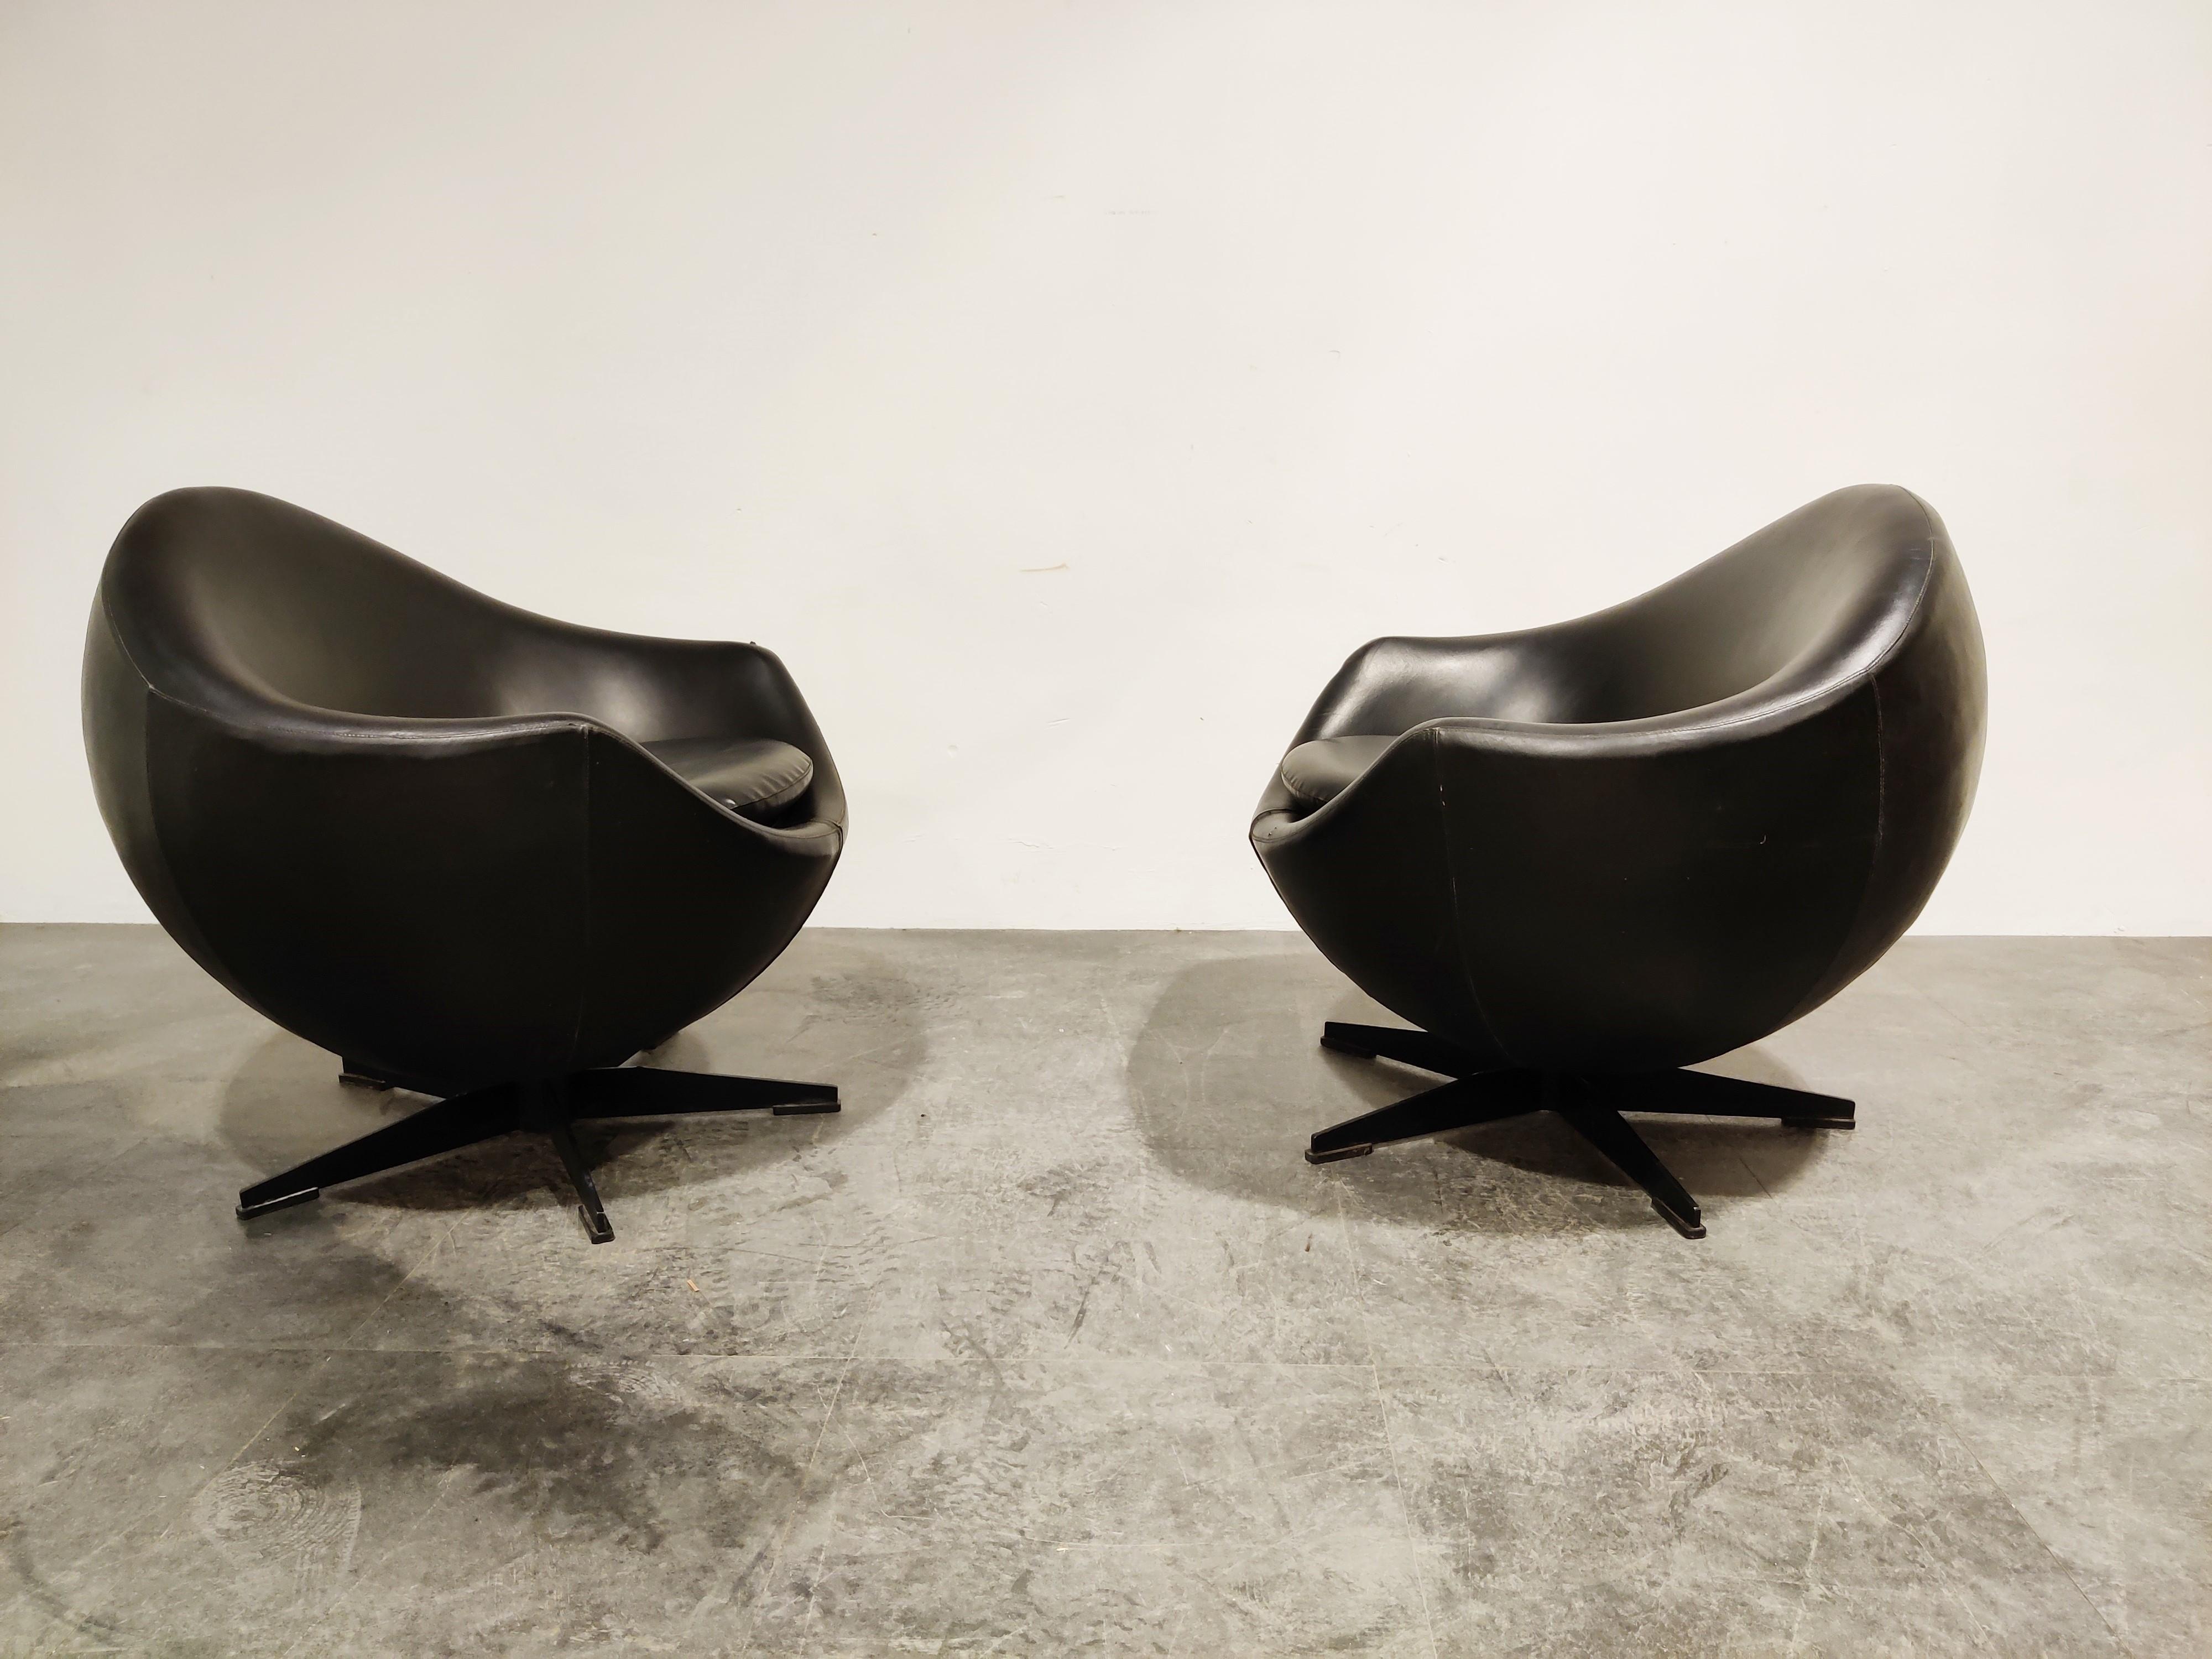 Mid century swivel lounge chairs model 'mars' designed by Pierre Guariche for Meurop.

The chair has a star shaped metal base and a with leatherette upholstered shell.

The chairs are in original condition, with some wear but still great looking